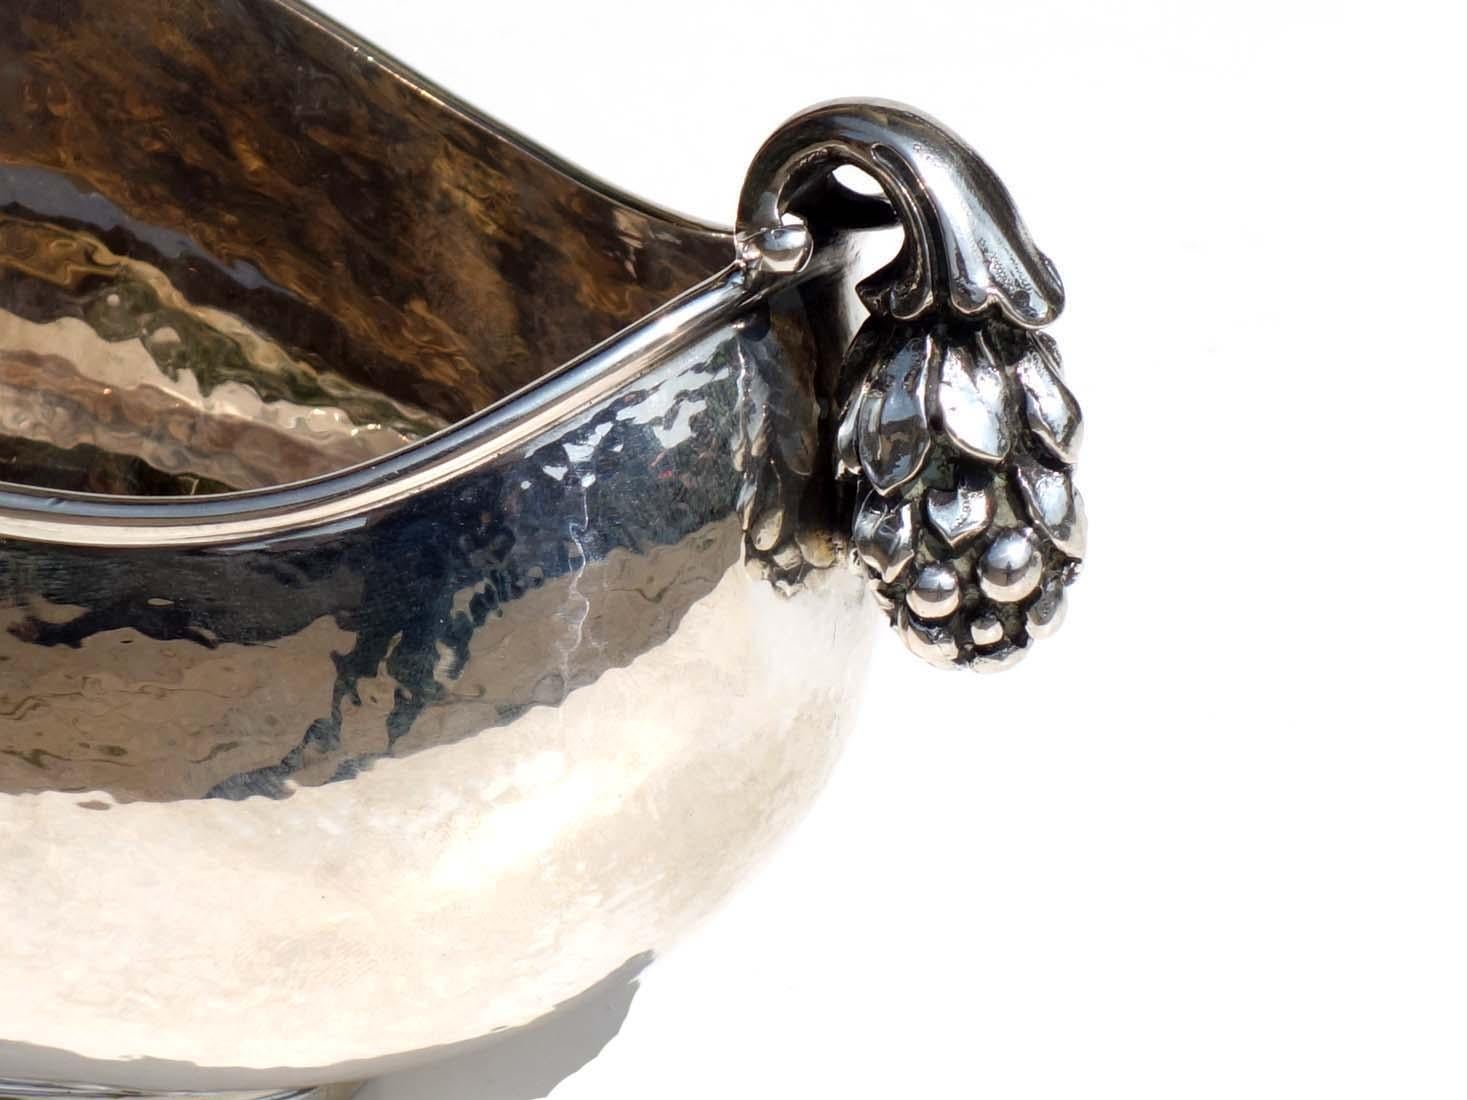 Art Deco silver cachepot
Perfect Condiction
weight: 820 gm.